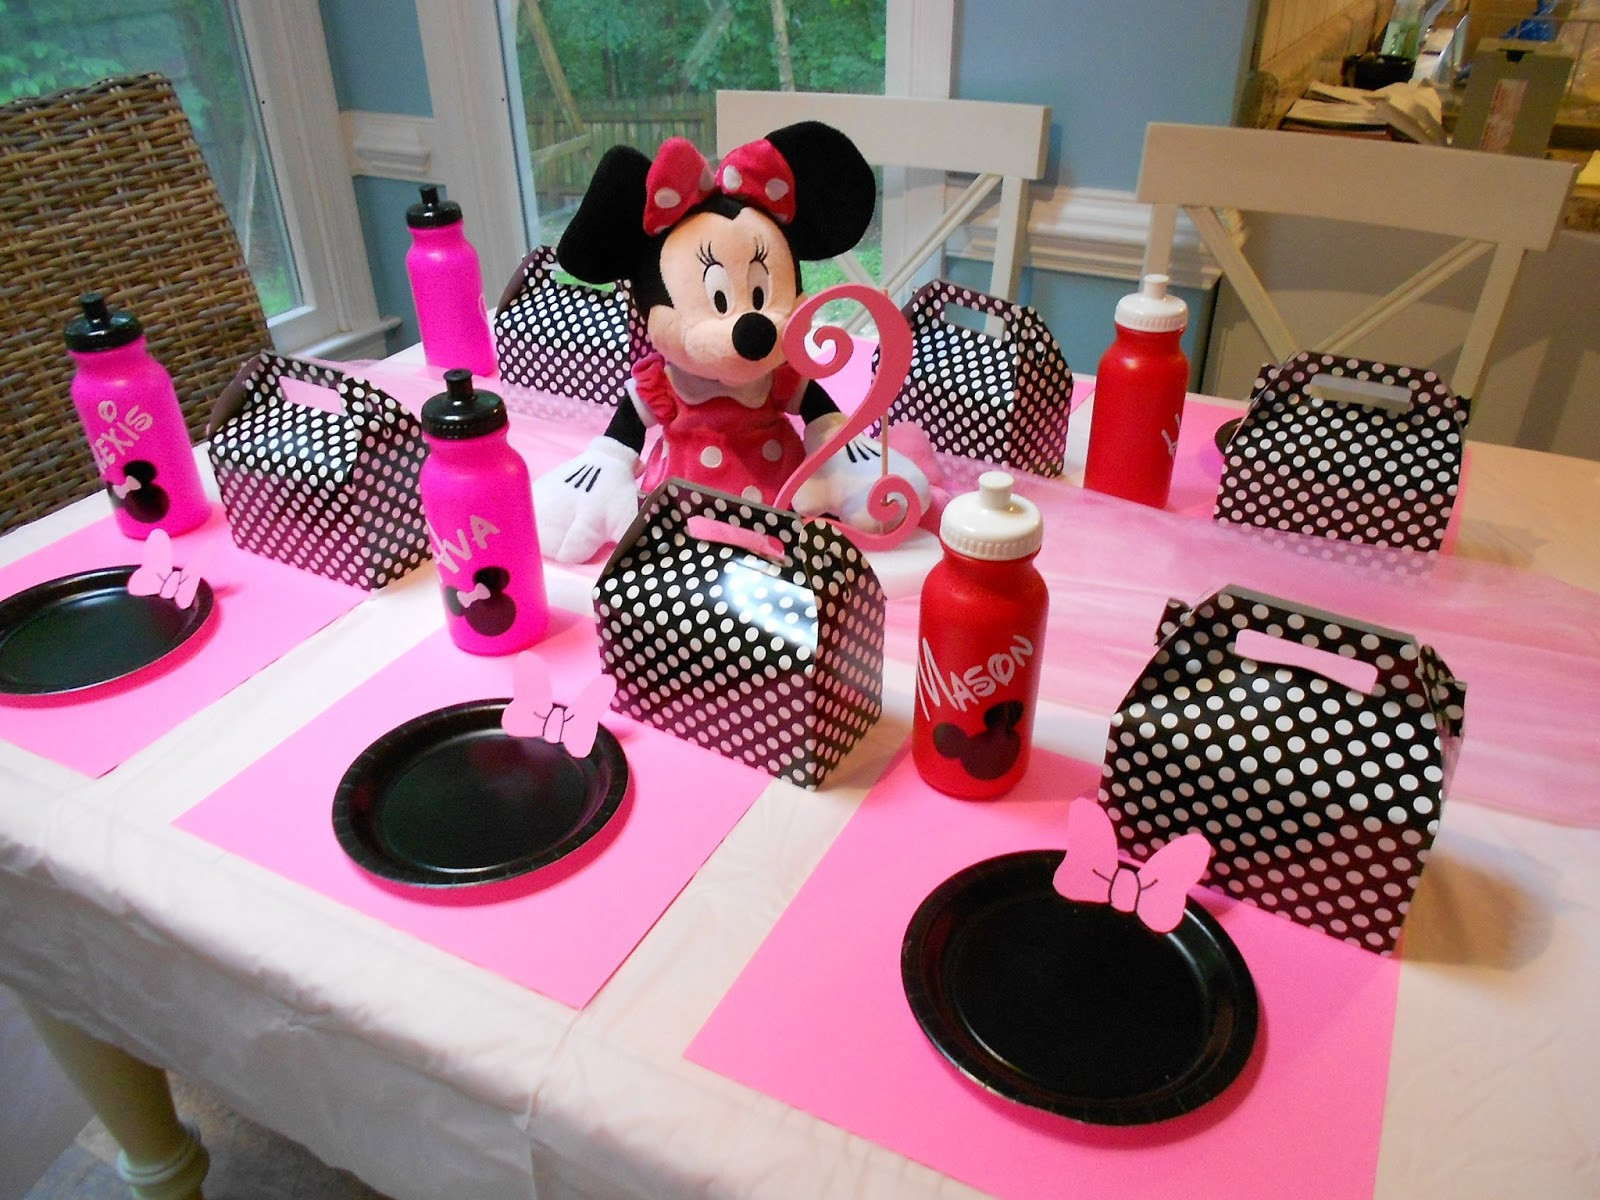 Minnie Mouse Birthday Decor
 Adventures With Toddlers and Preschoolers Minnie Mouse